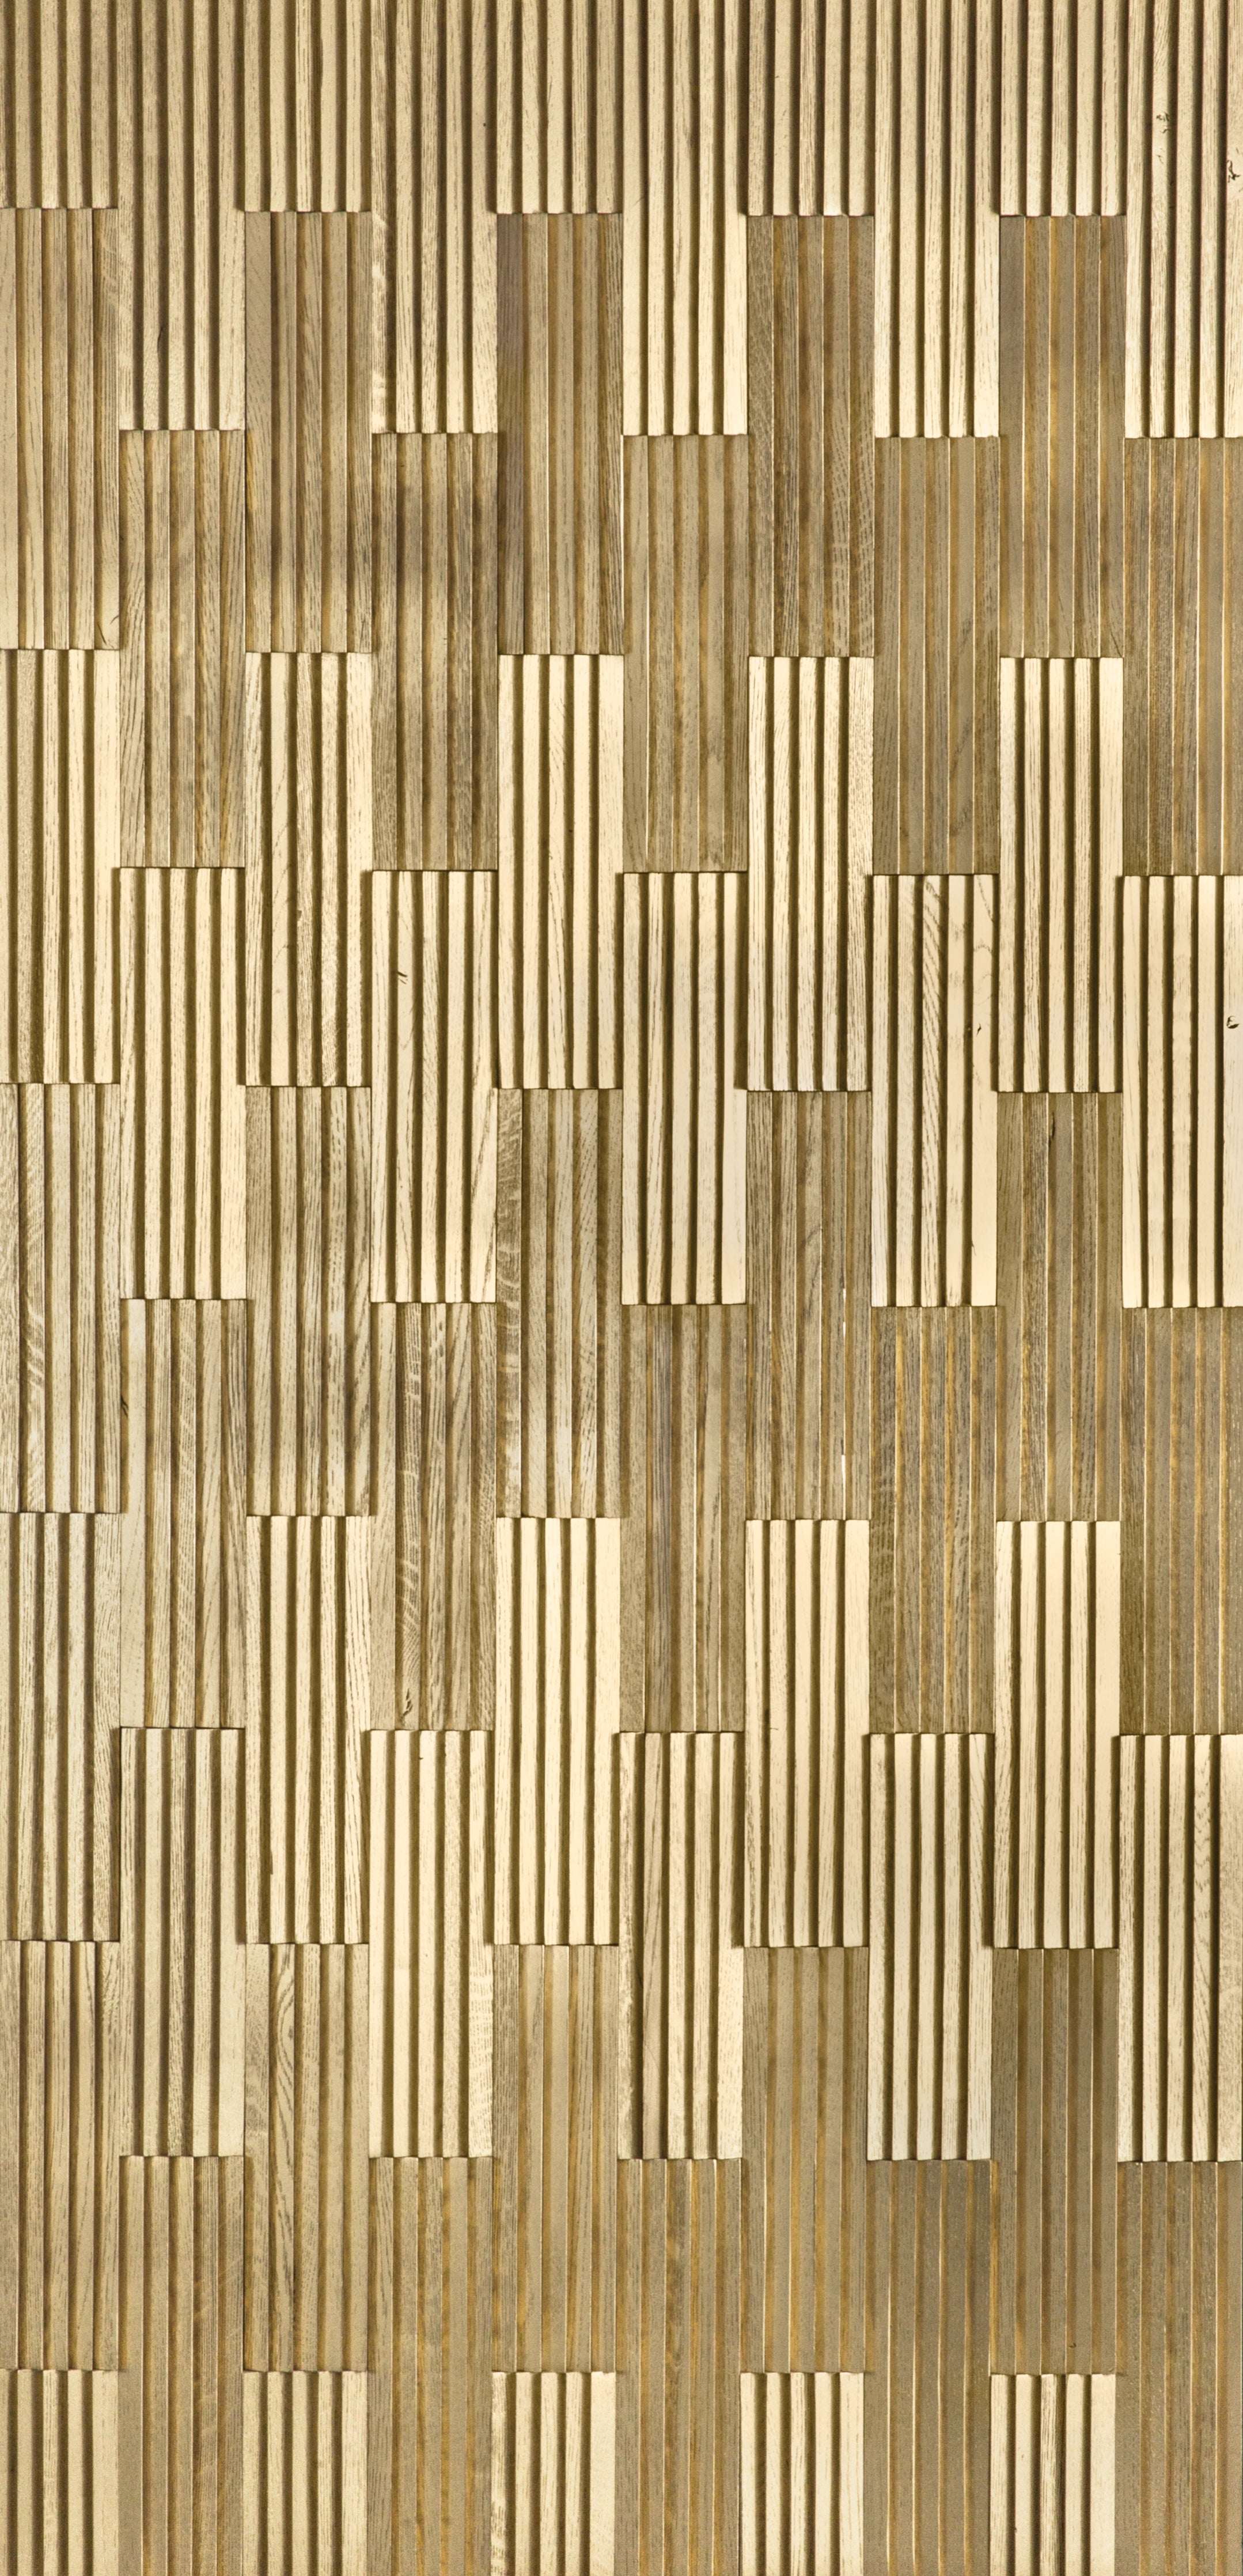 duchateau inceptiv vertex gold oak three dimensional wall natural wood panel lacquer for interior use distributed by surface group international